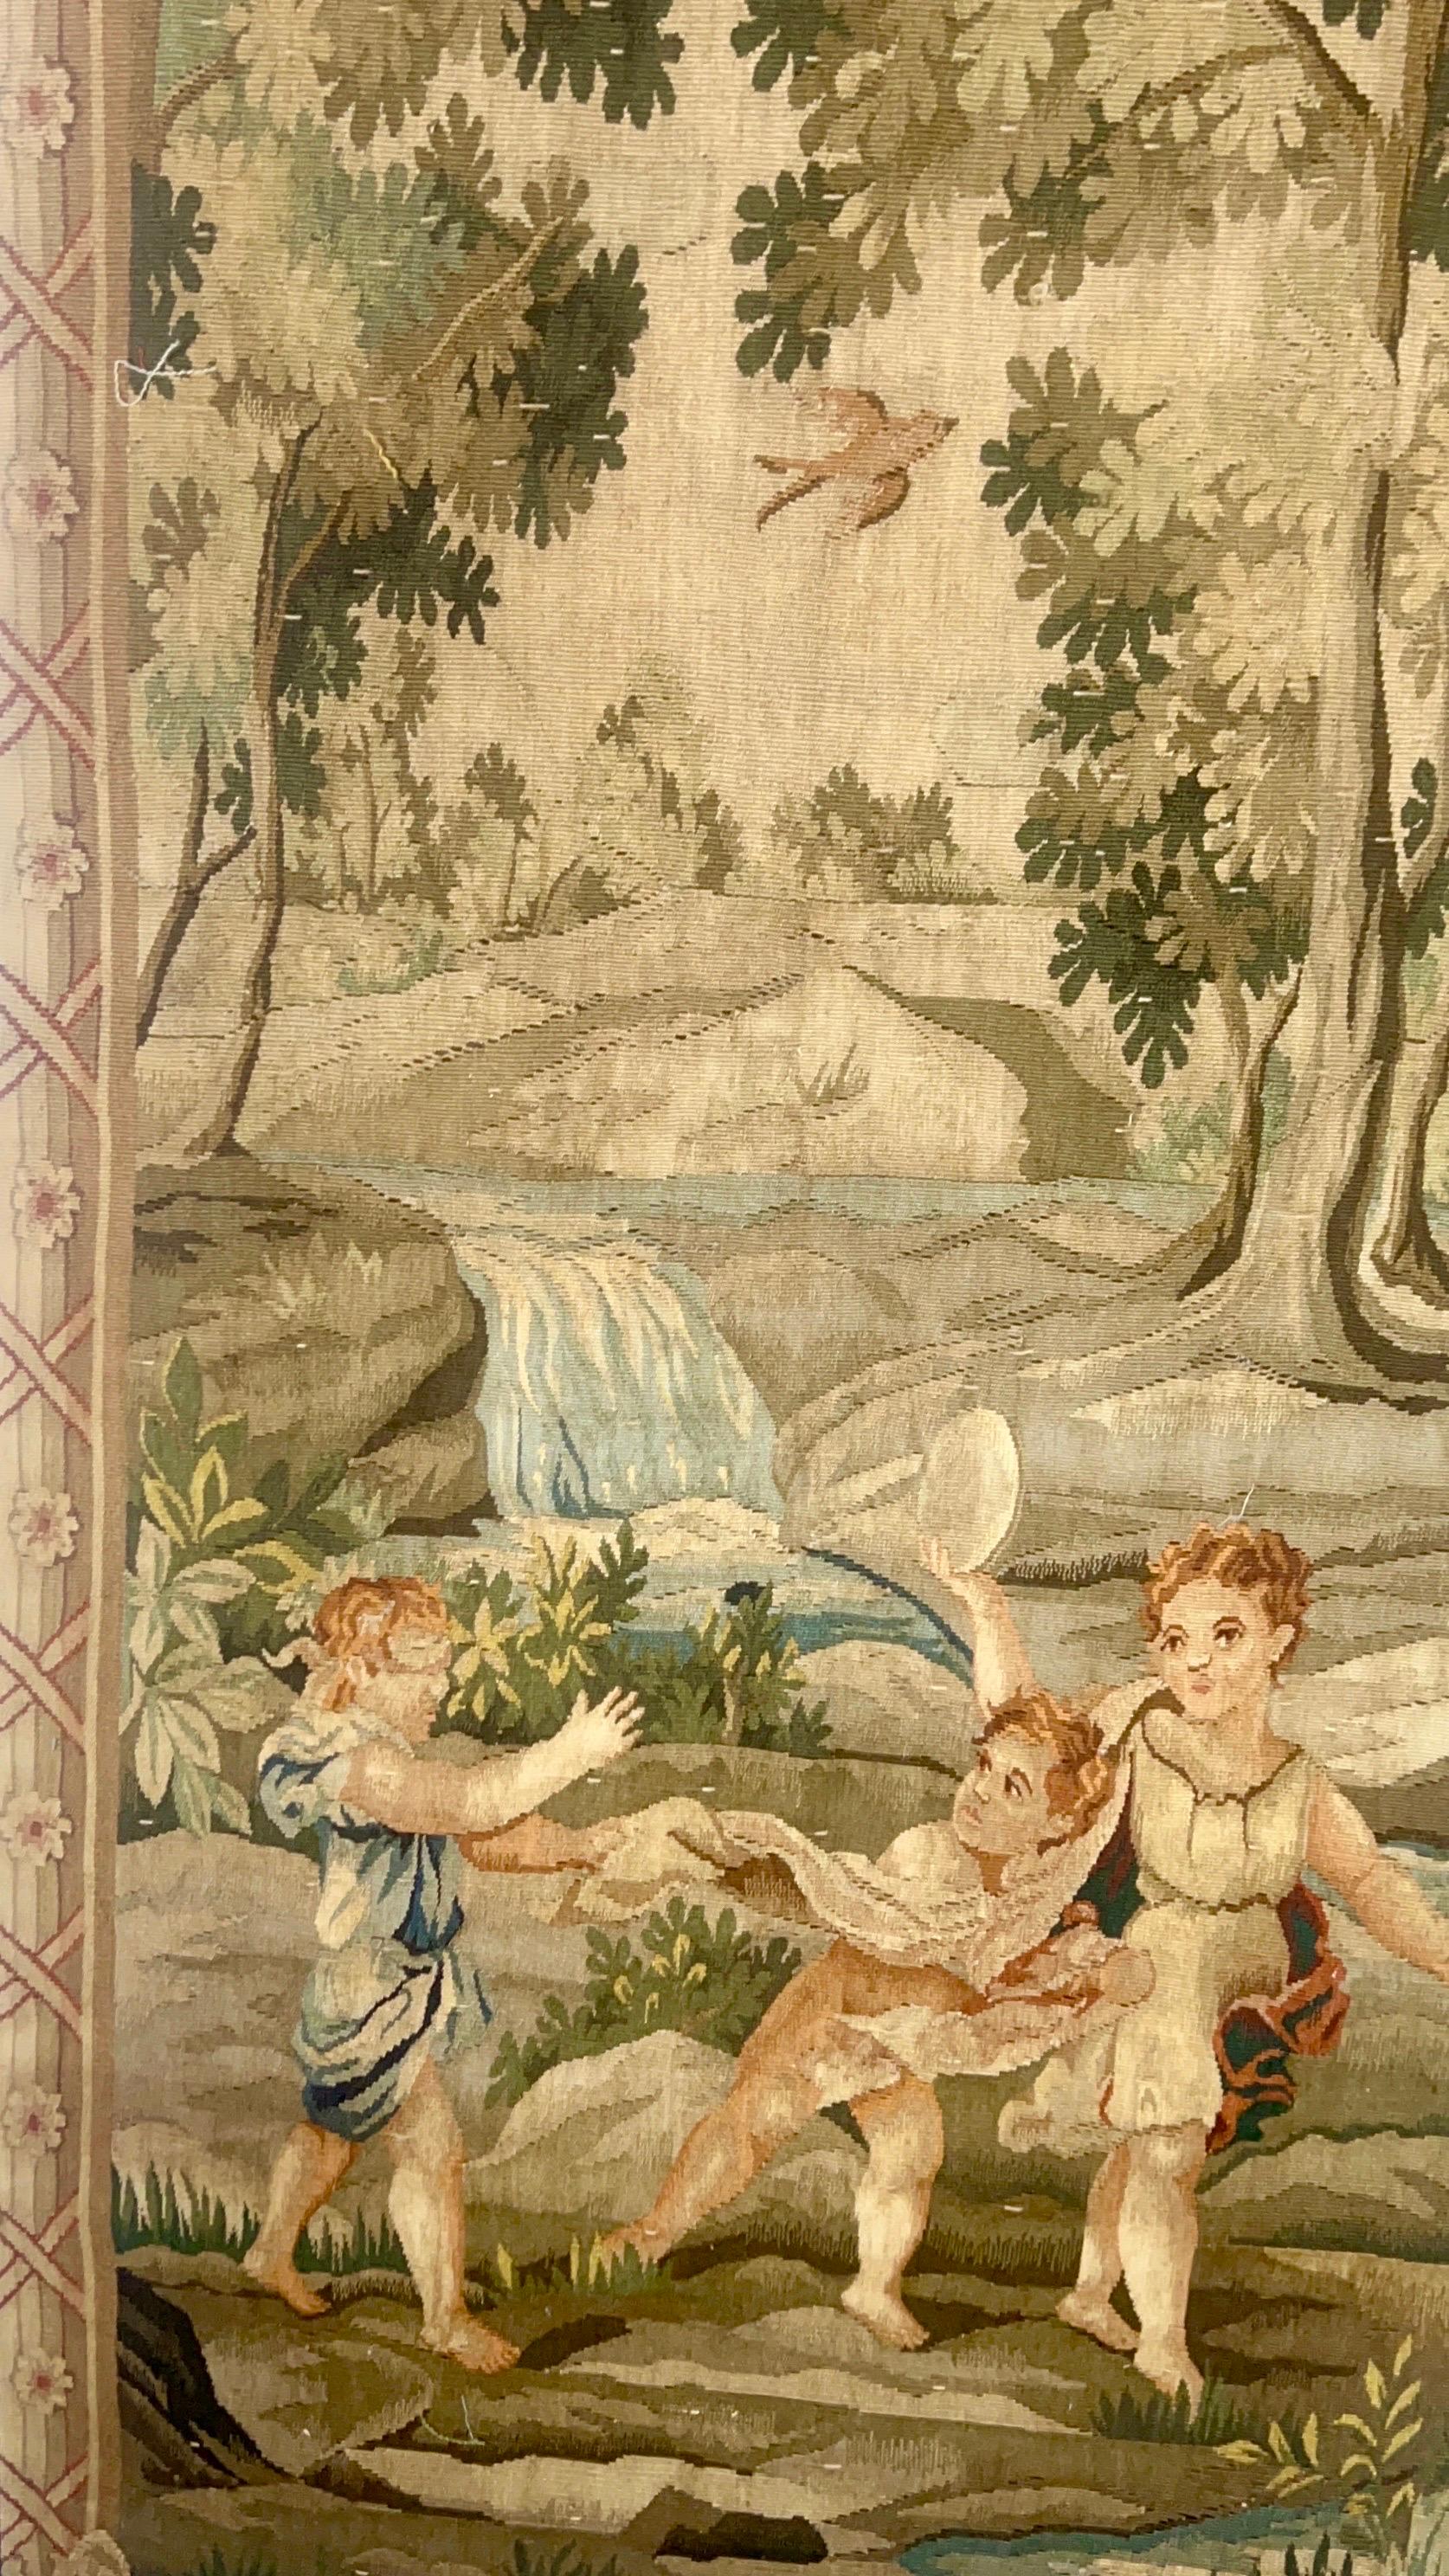 Belgium and french fine quality wall tapestries are a woven wall hanging that depicts a scene or famous painting.  This tapestry features a pastoral scene. 
In the foreground there are a group of children playing in a field.  The detailed work